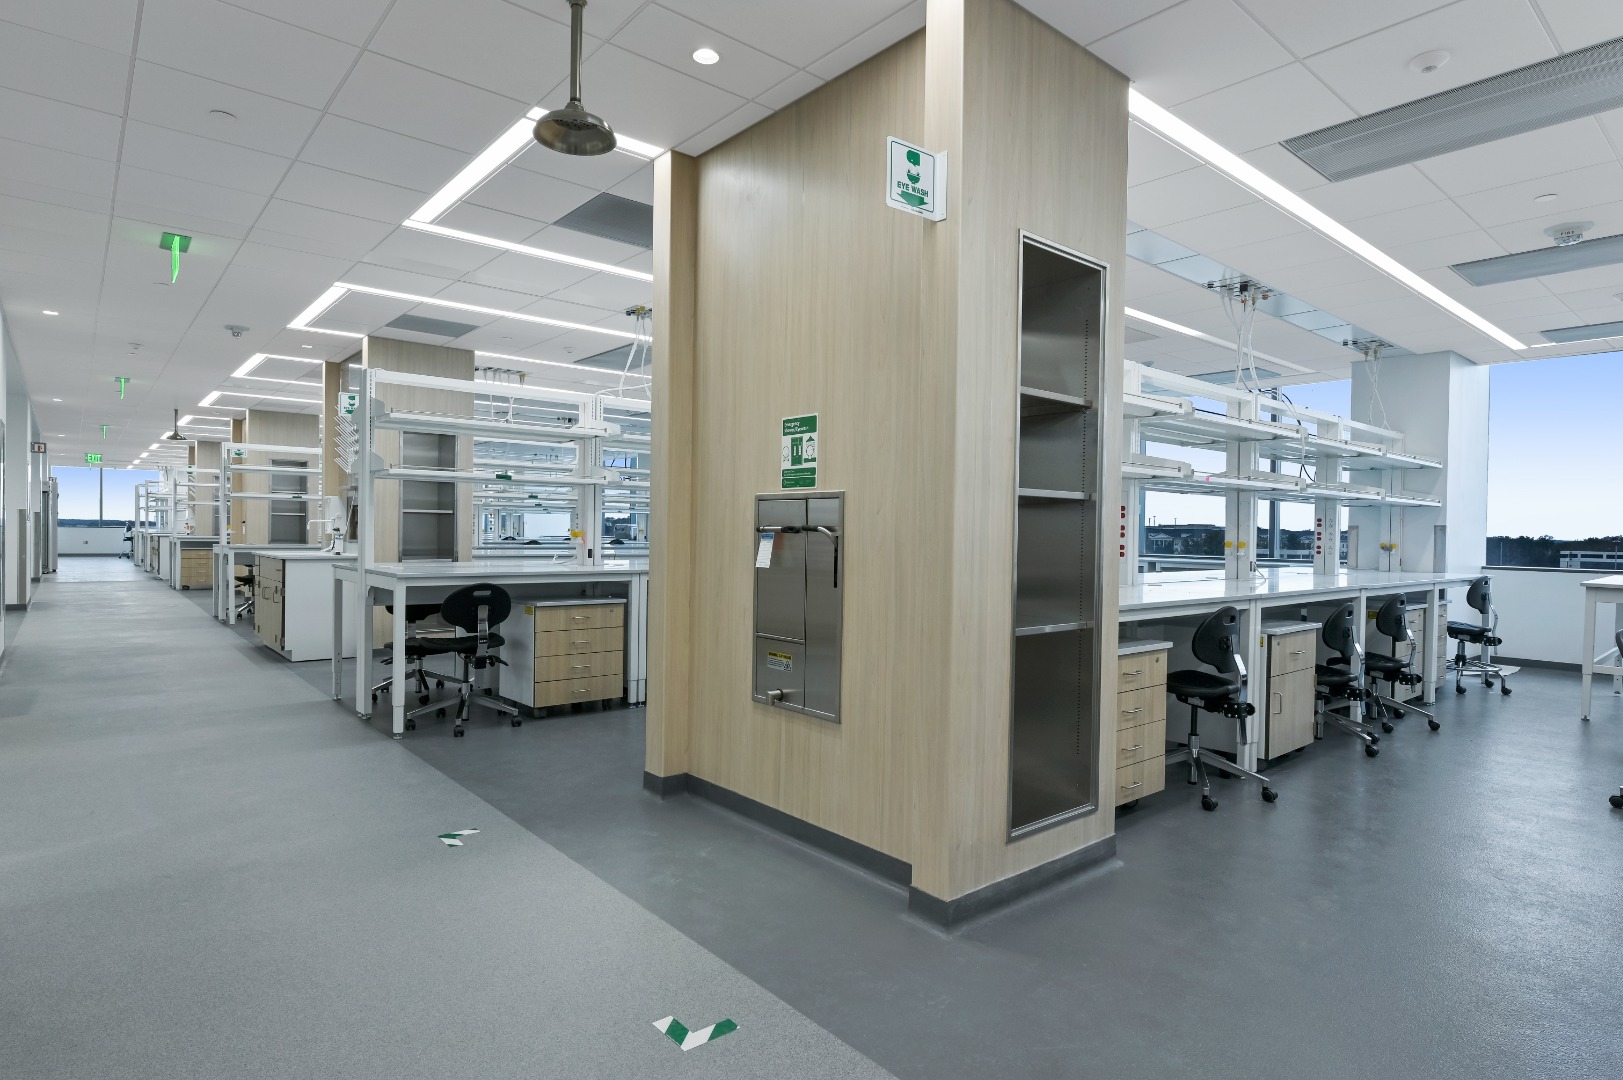 A newly renovated laboratory includes updated process equipment, work spaces, and a new epoxy floor topping.